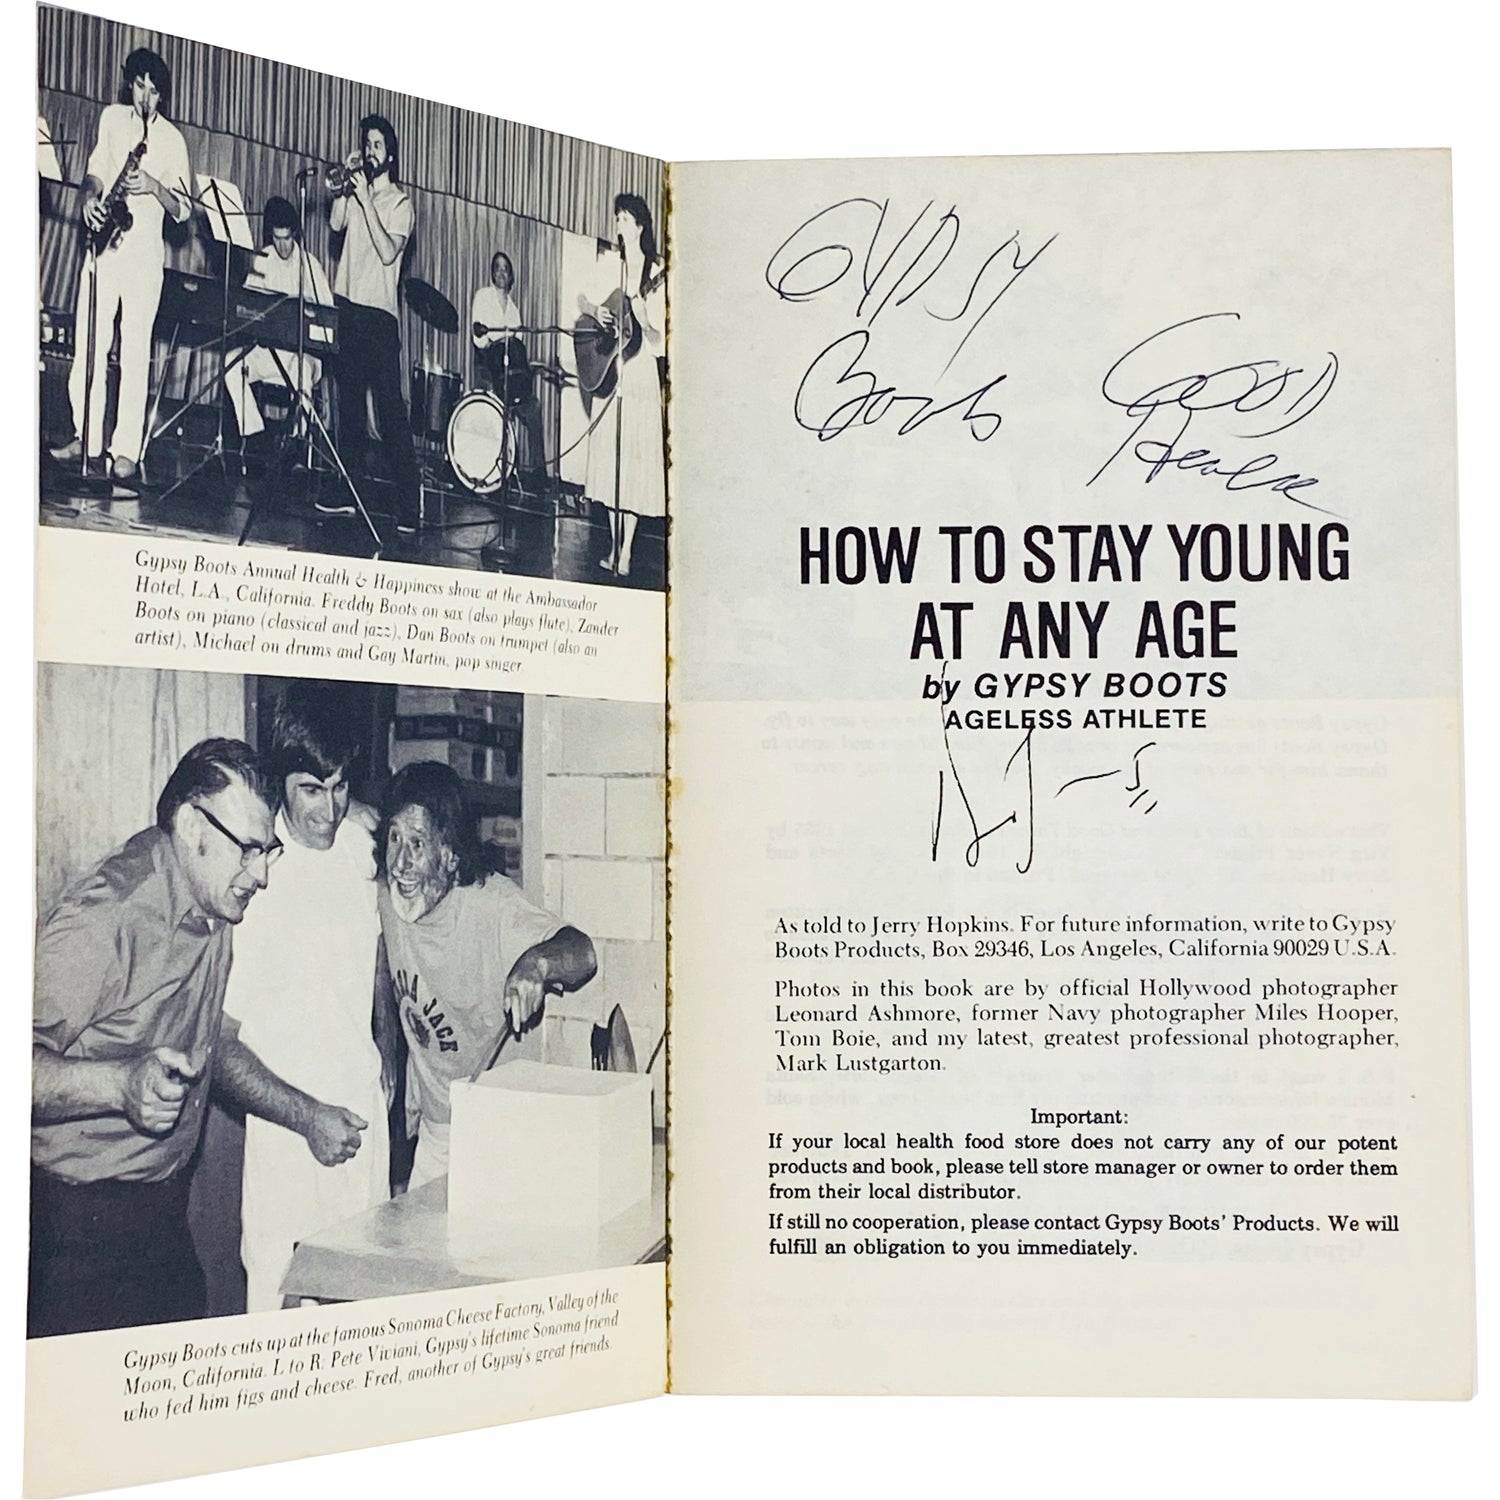 GYPSY BOOTS - HOW TO STAY YOUNG AT ANY AGE BOOK